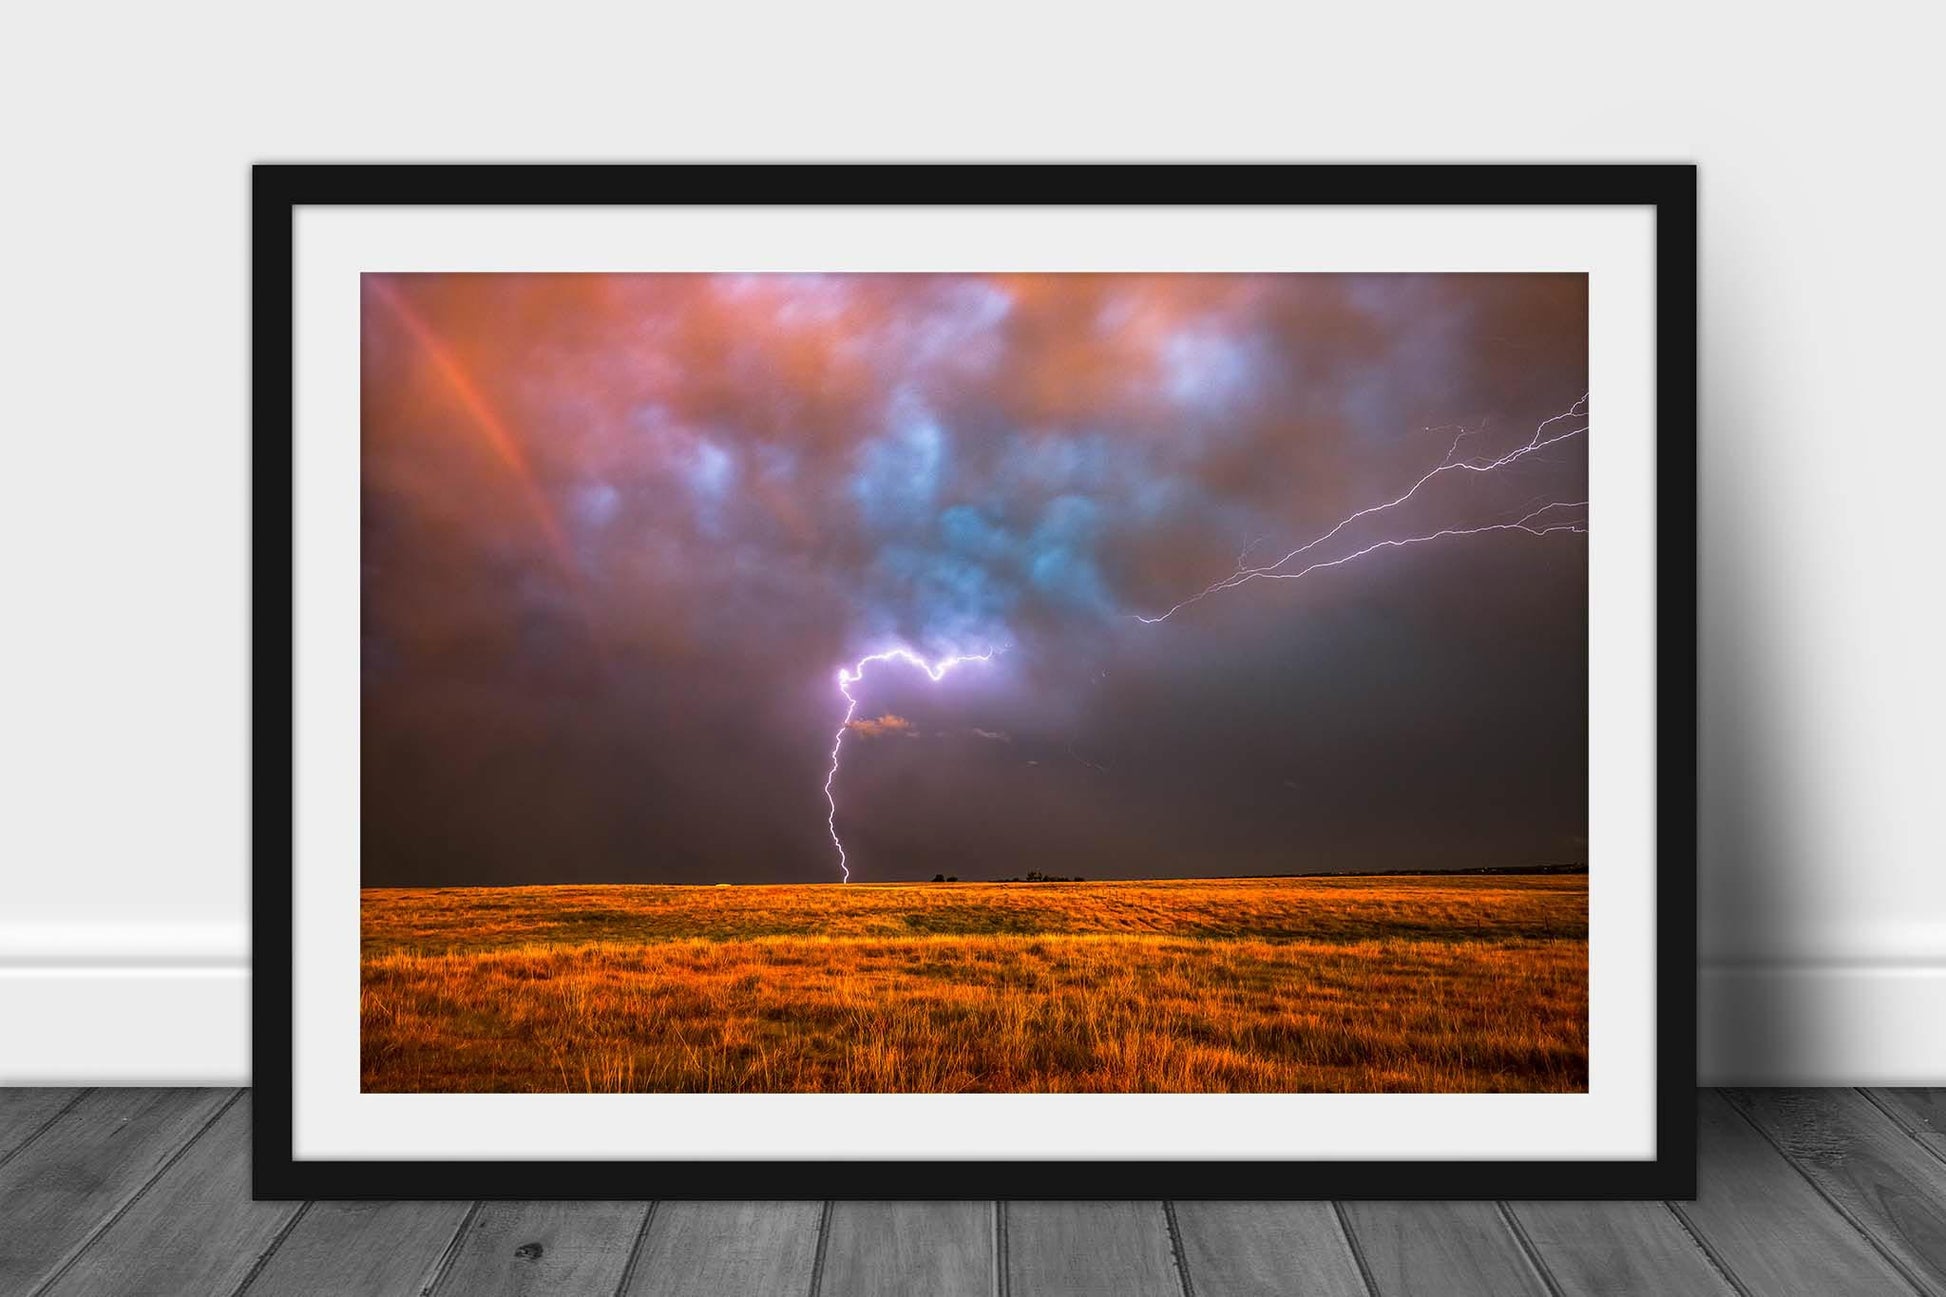 Framed storm print of lightning spanning the sky over open prairie at sunset on a stormy evening in Oklahoma by Sean Ramsey of Southern Plains Photography.